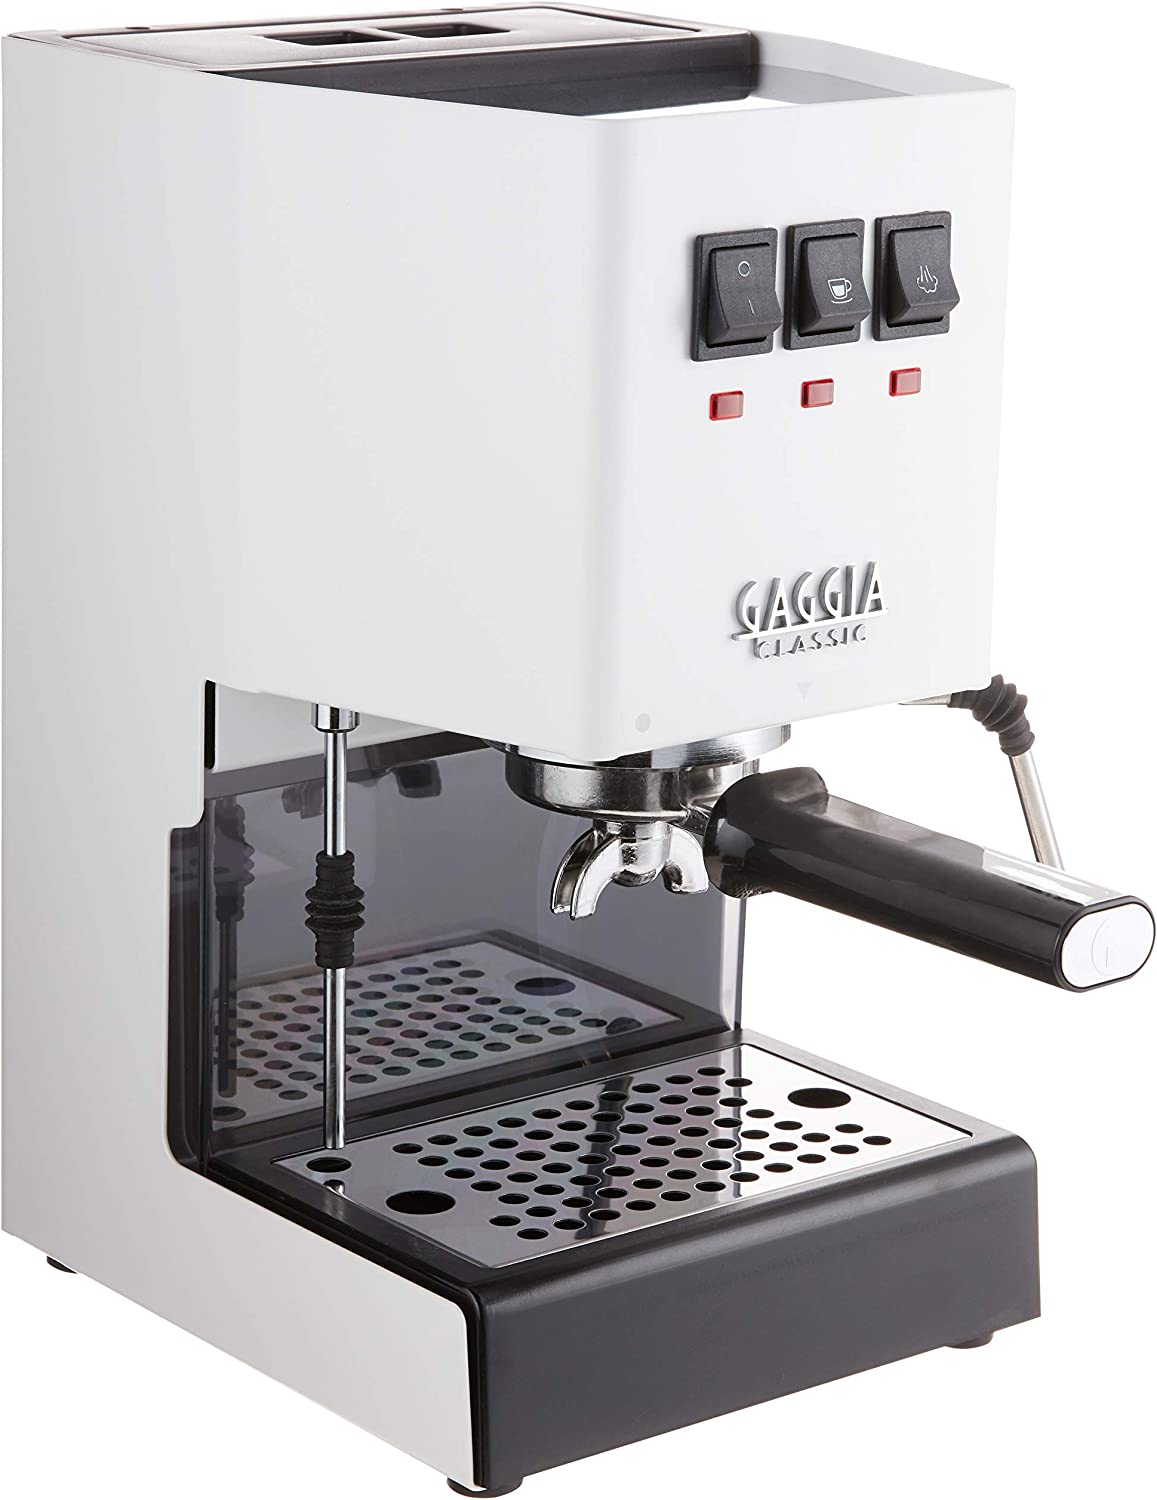 This is the best espresso machine under $500 that you can get